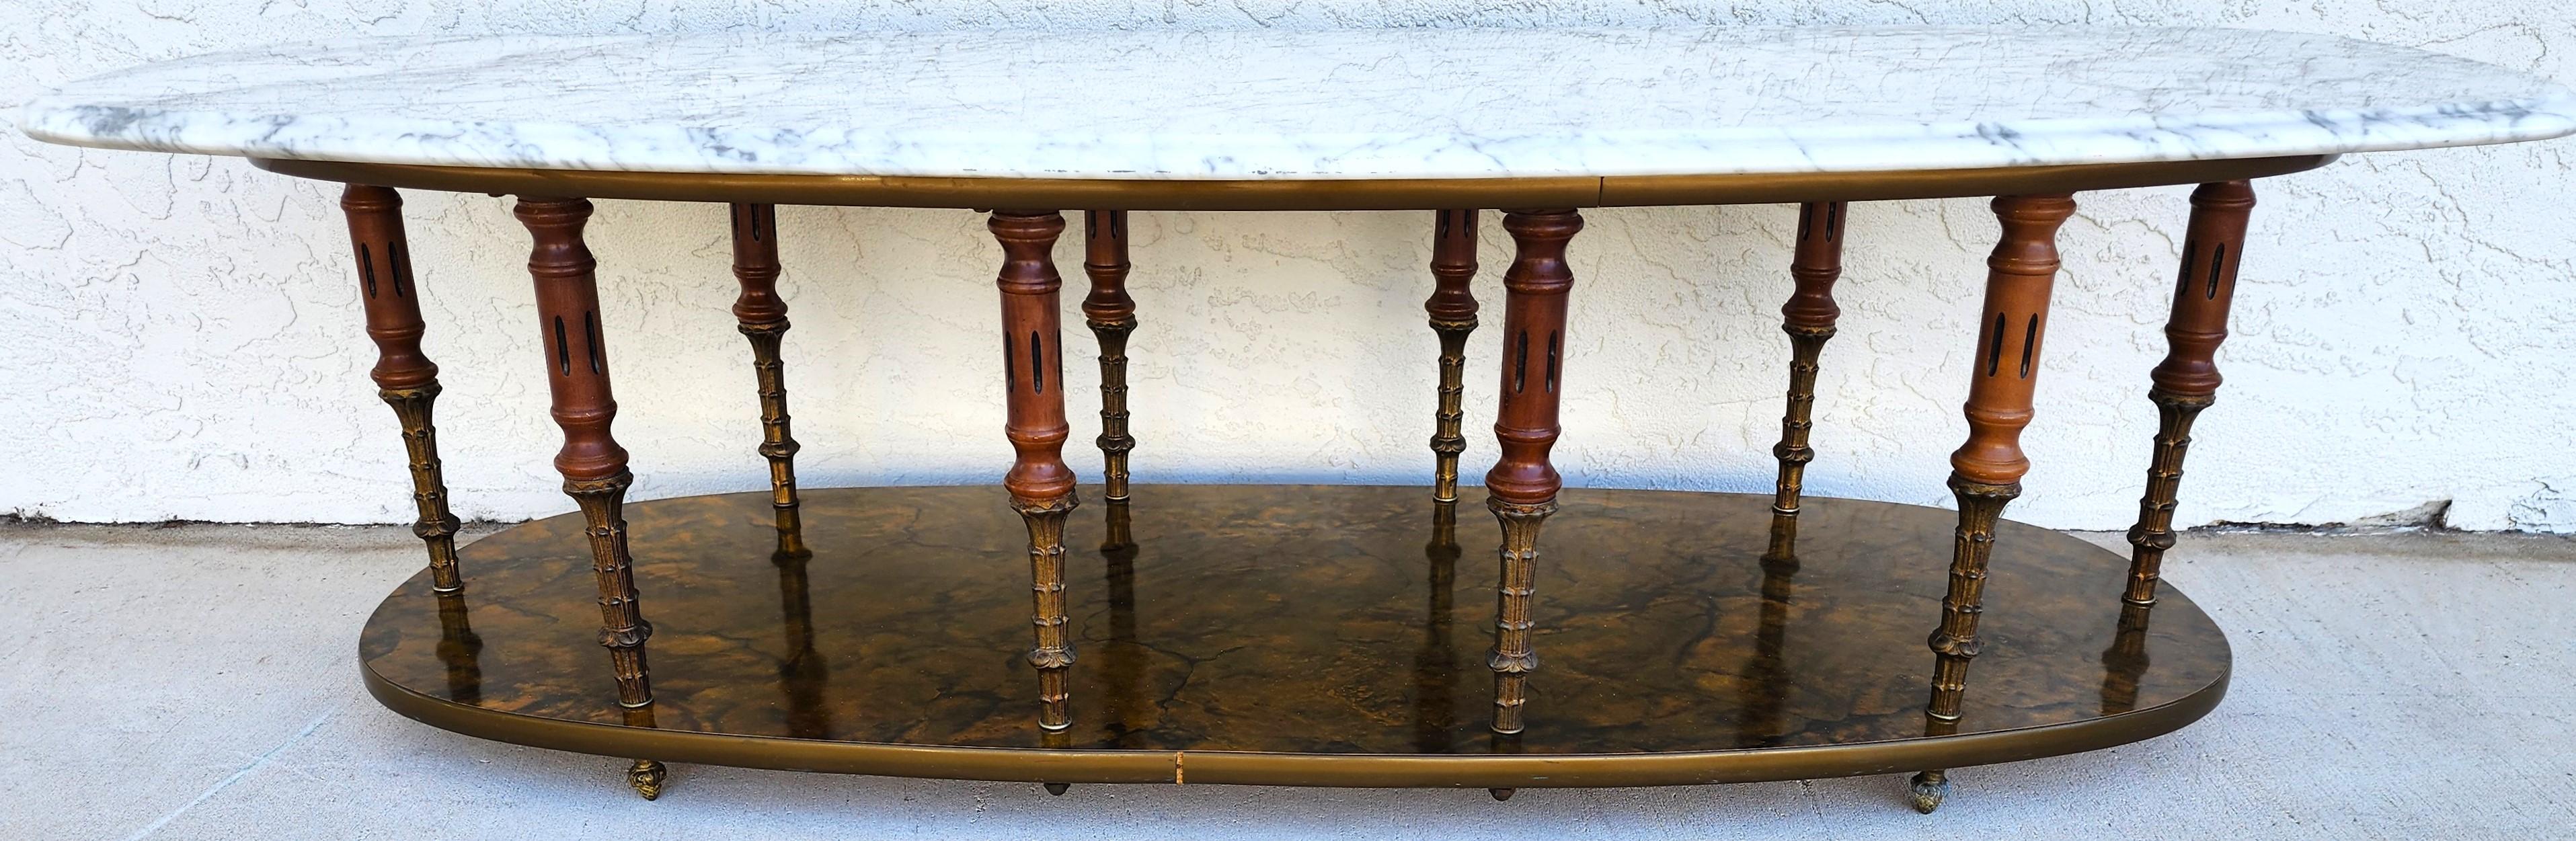 Vintage Coffee Table Italian Marble In Good Condition For Sale In Lake Worth, FL